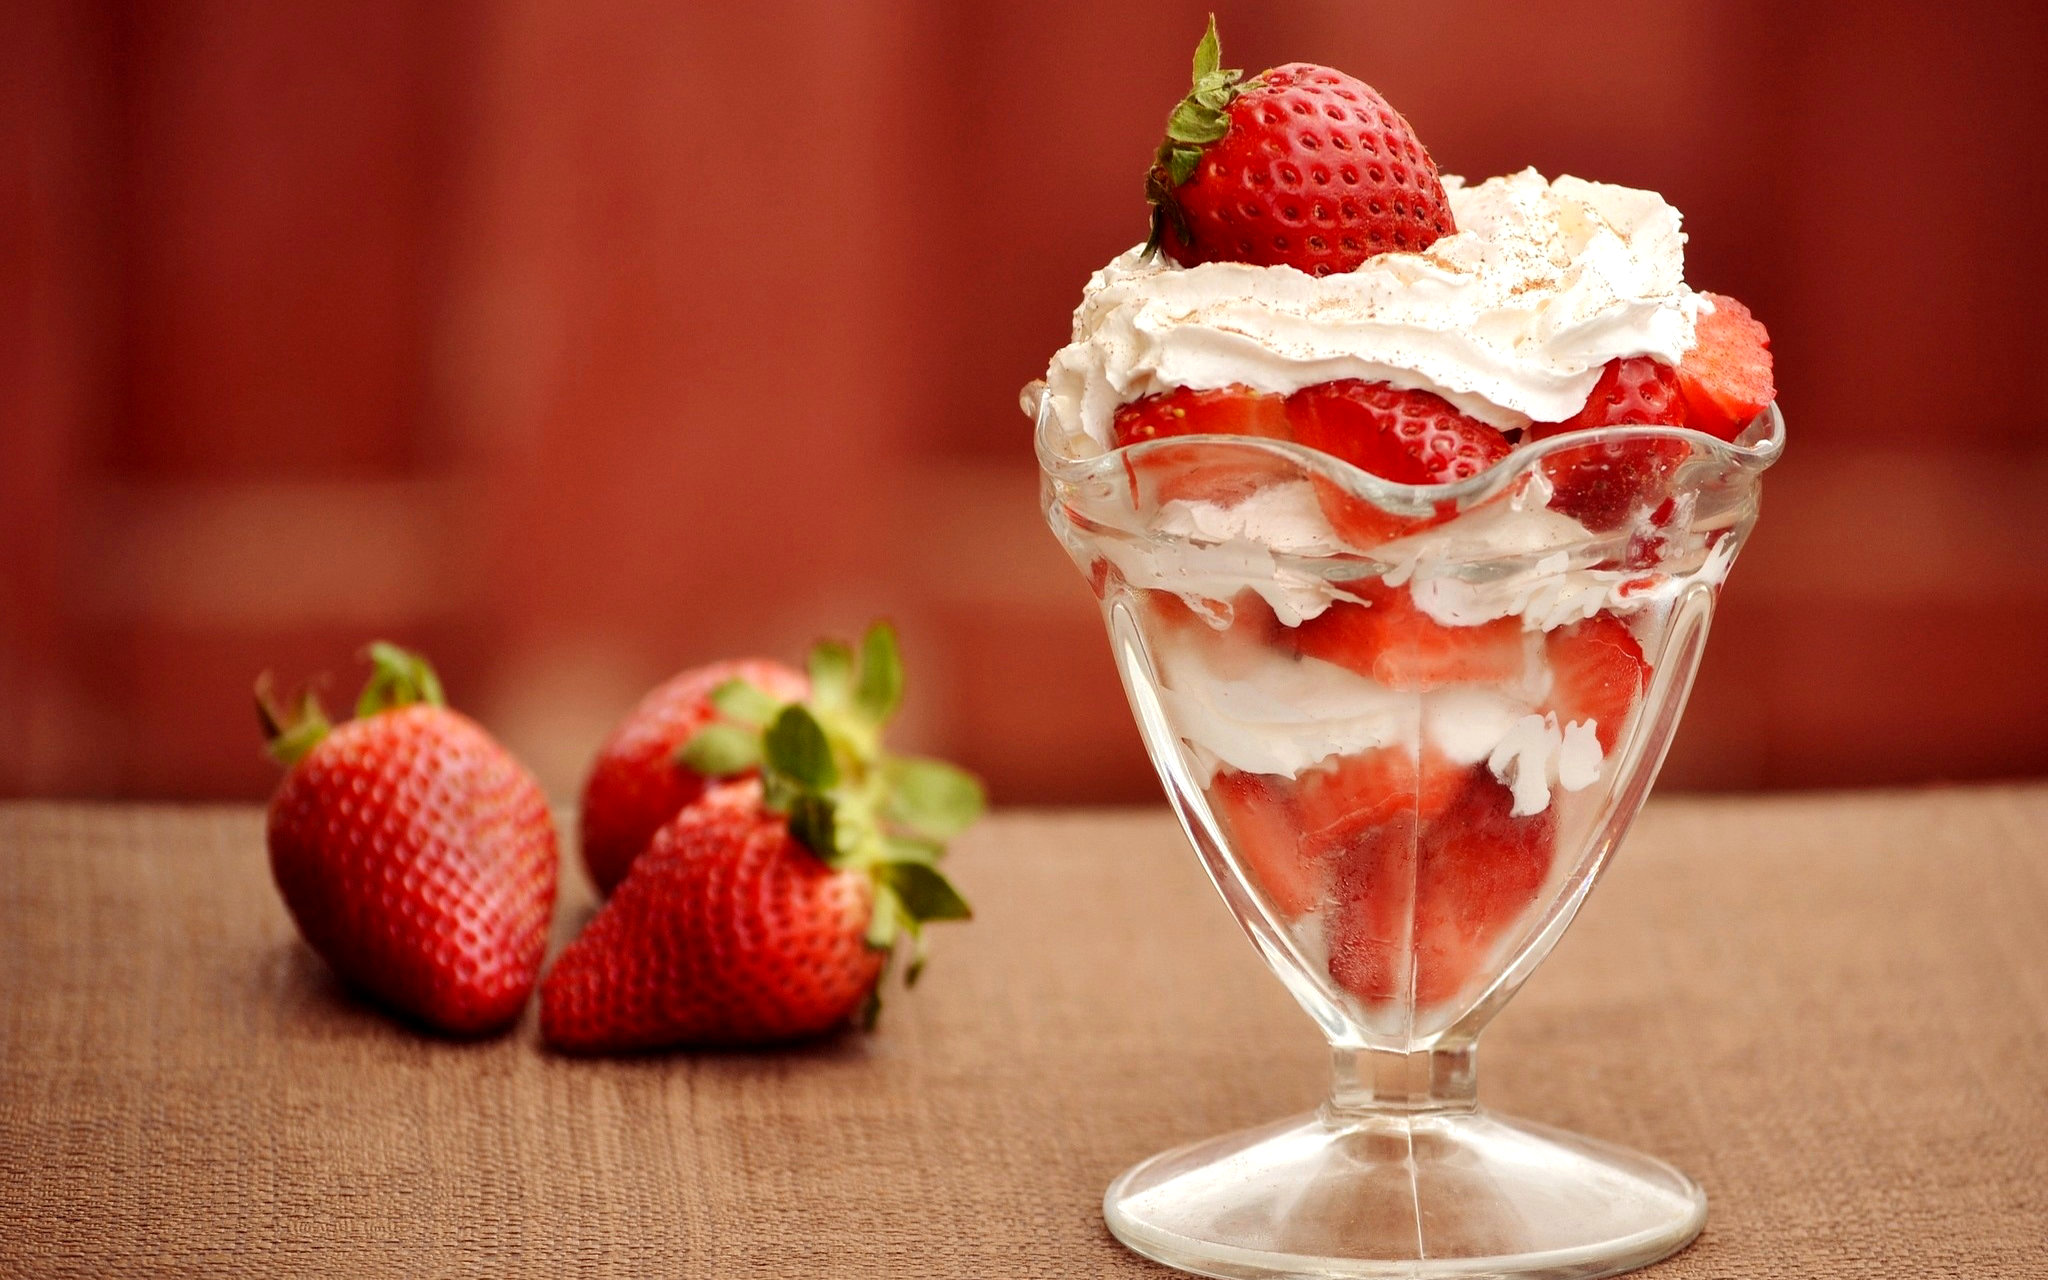  18 2015 By Stephen Comments Off on Strawberry Ice Cream HD Wallpapers